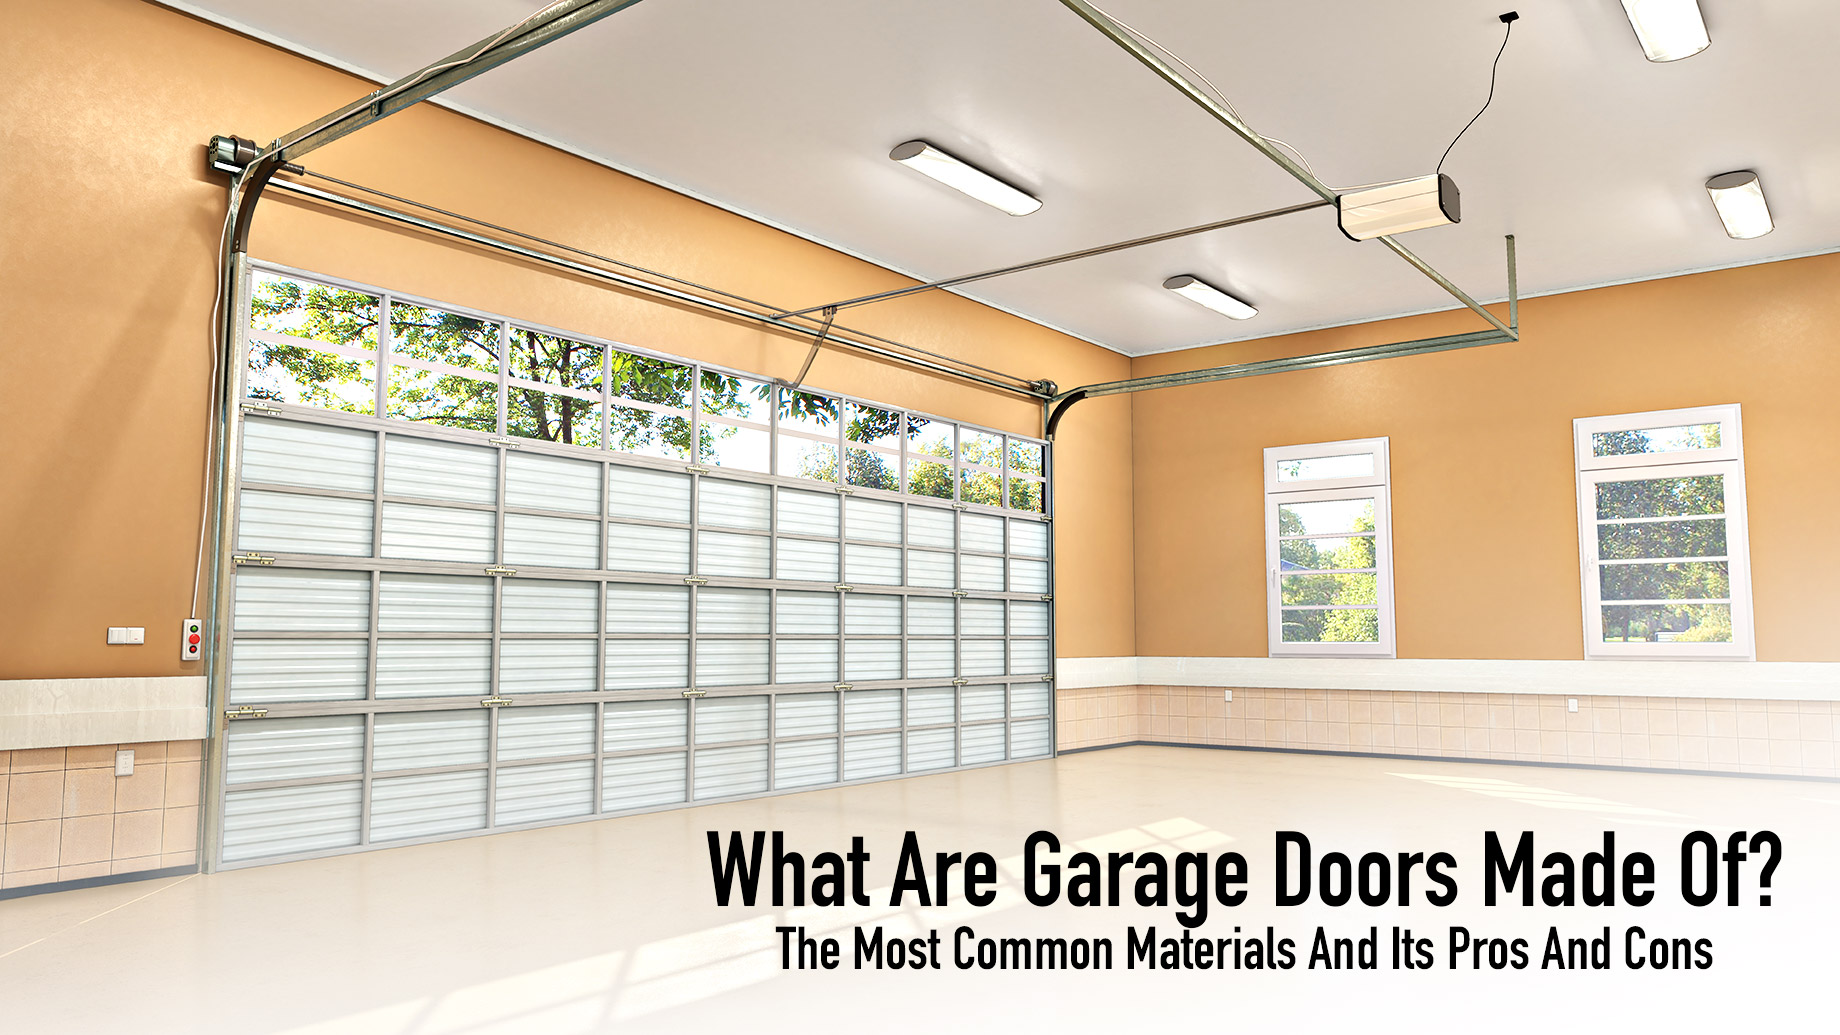 What Are Garage Doors Made Of? The Most Common Materials And Its Pros And Cons